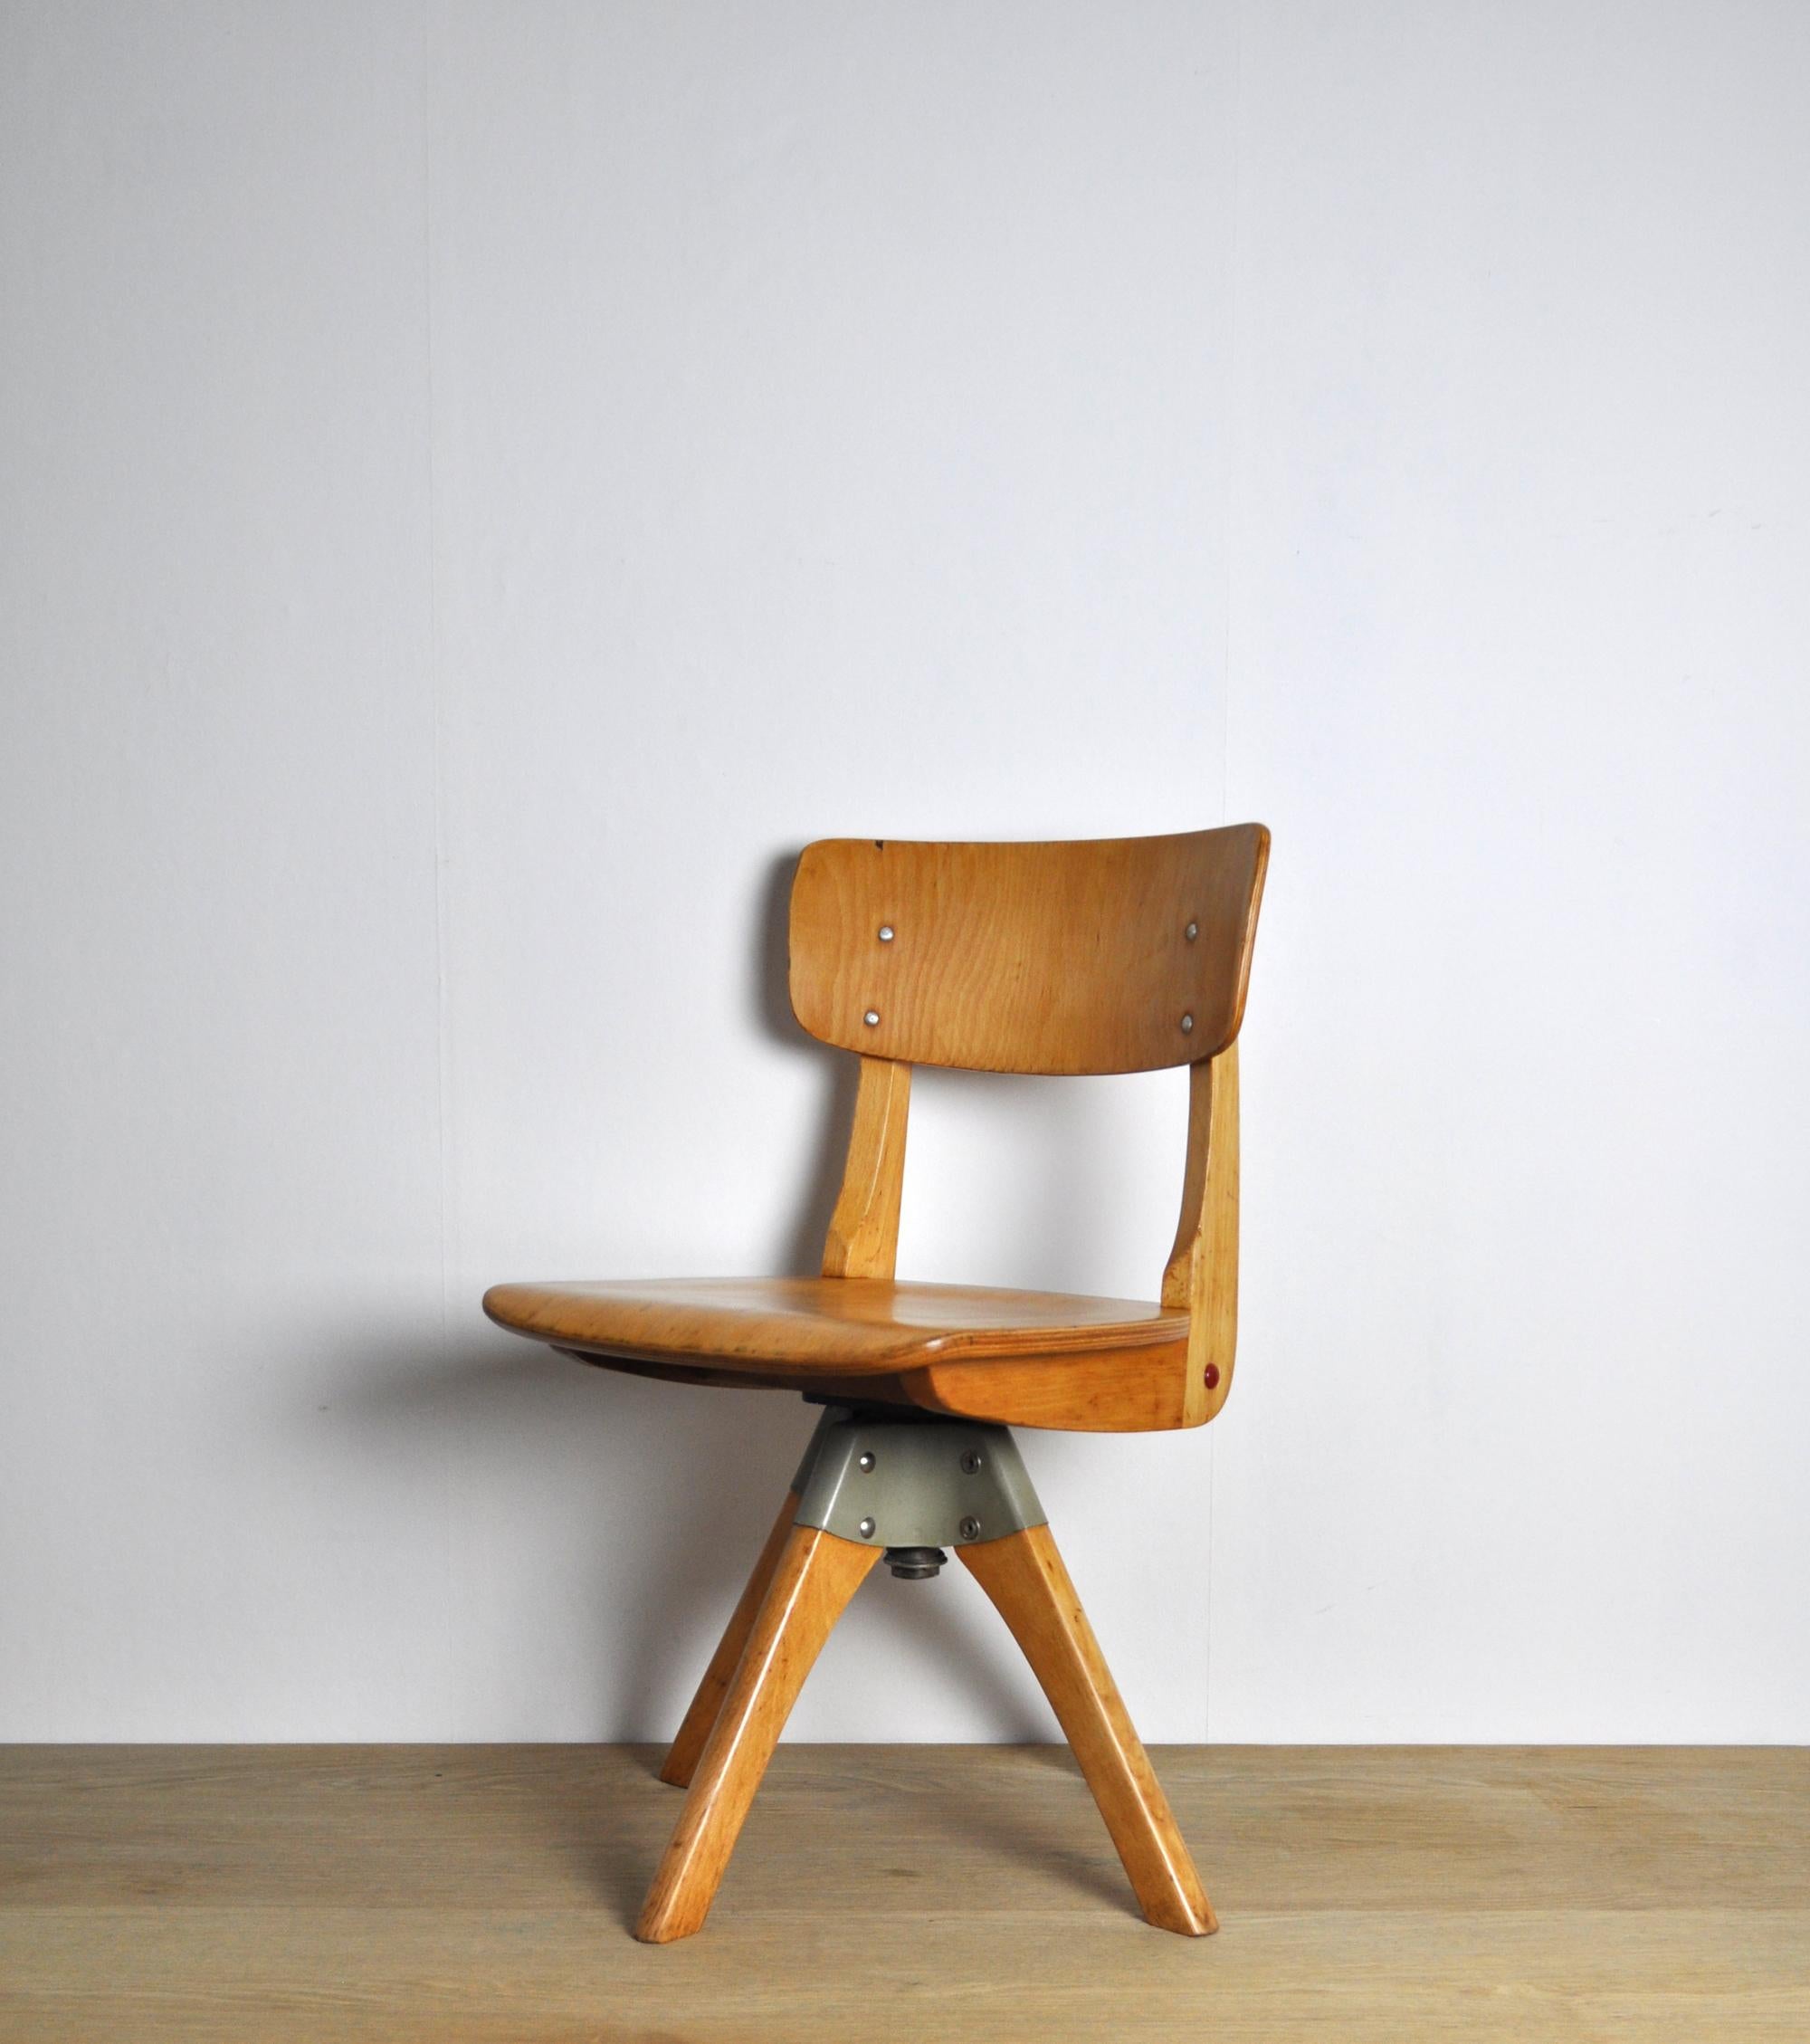 Patinated Casala wood childrens swivel chair, Germany 1970s.
Solid craftsmanship and comfortable chair. 
Good patinated vintage condition.